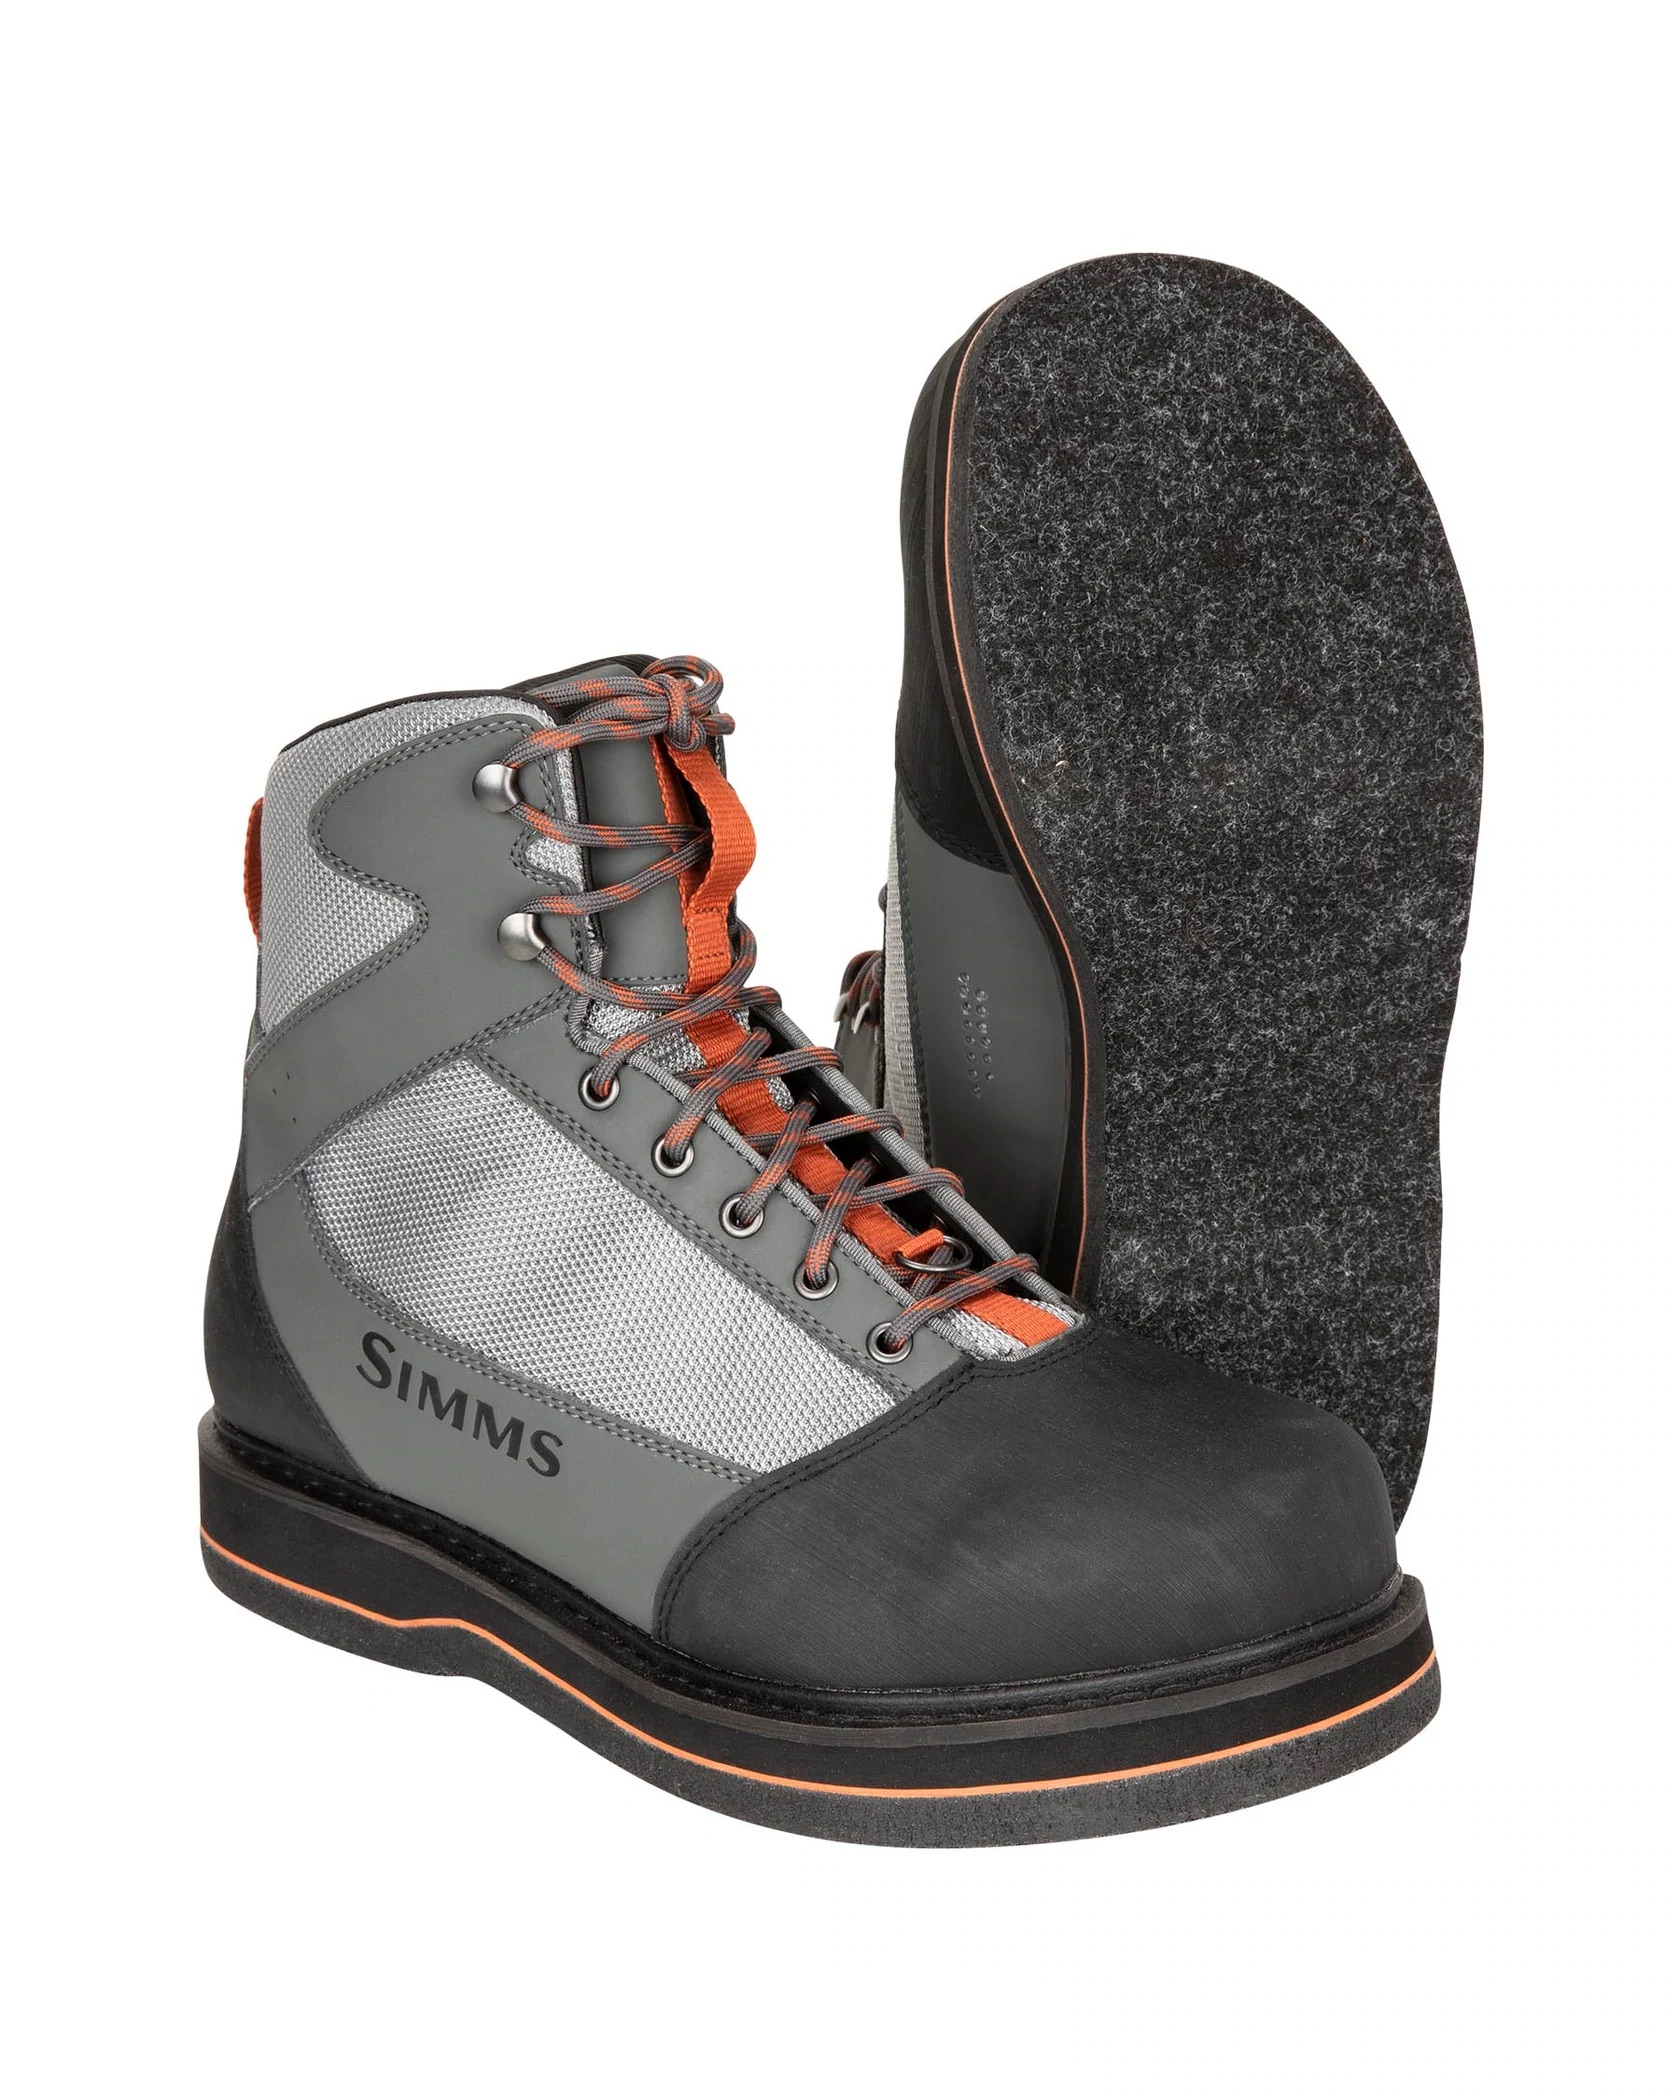 Simms Tributary Boot - Felt - Size 10